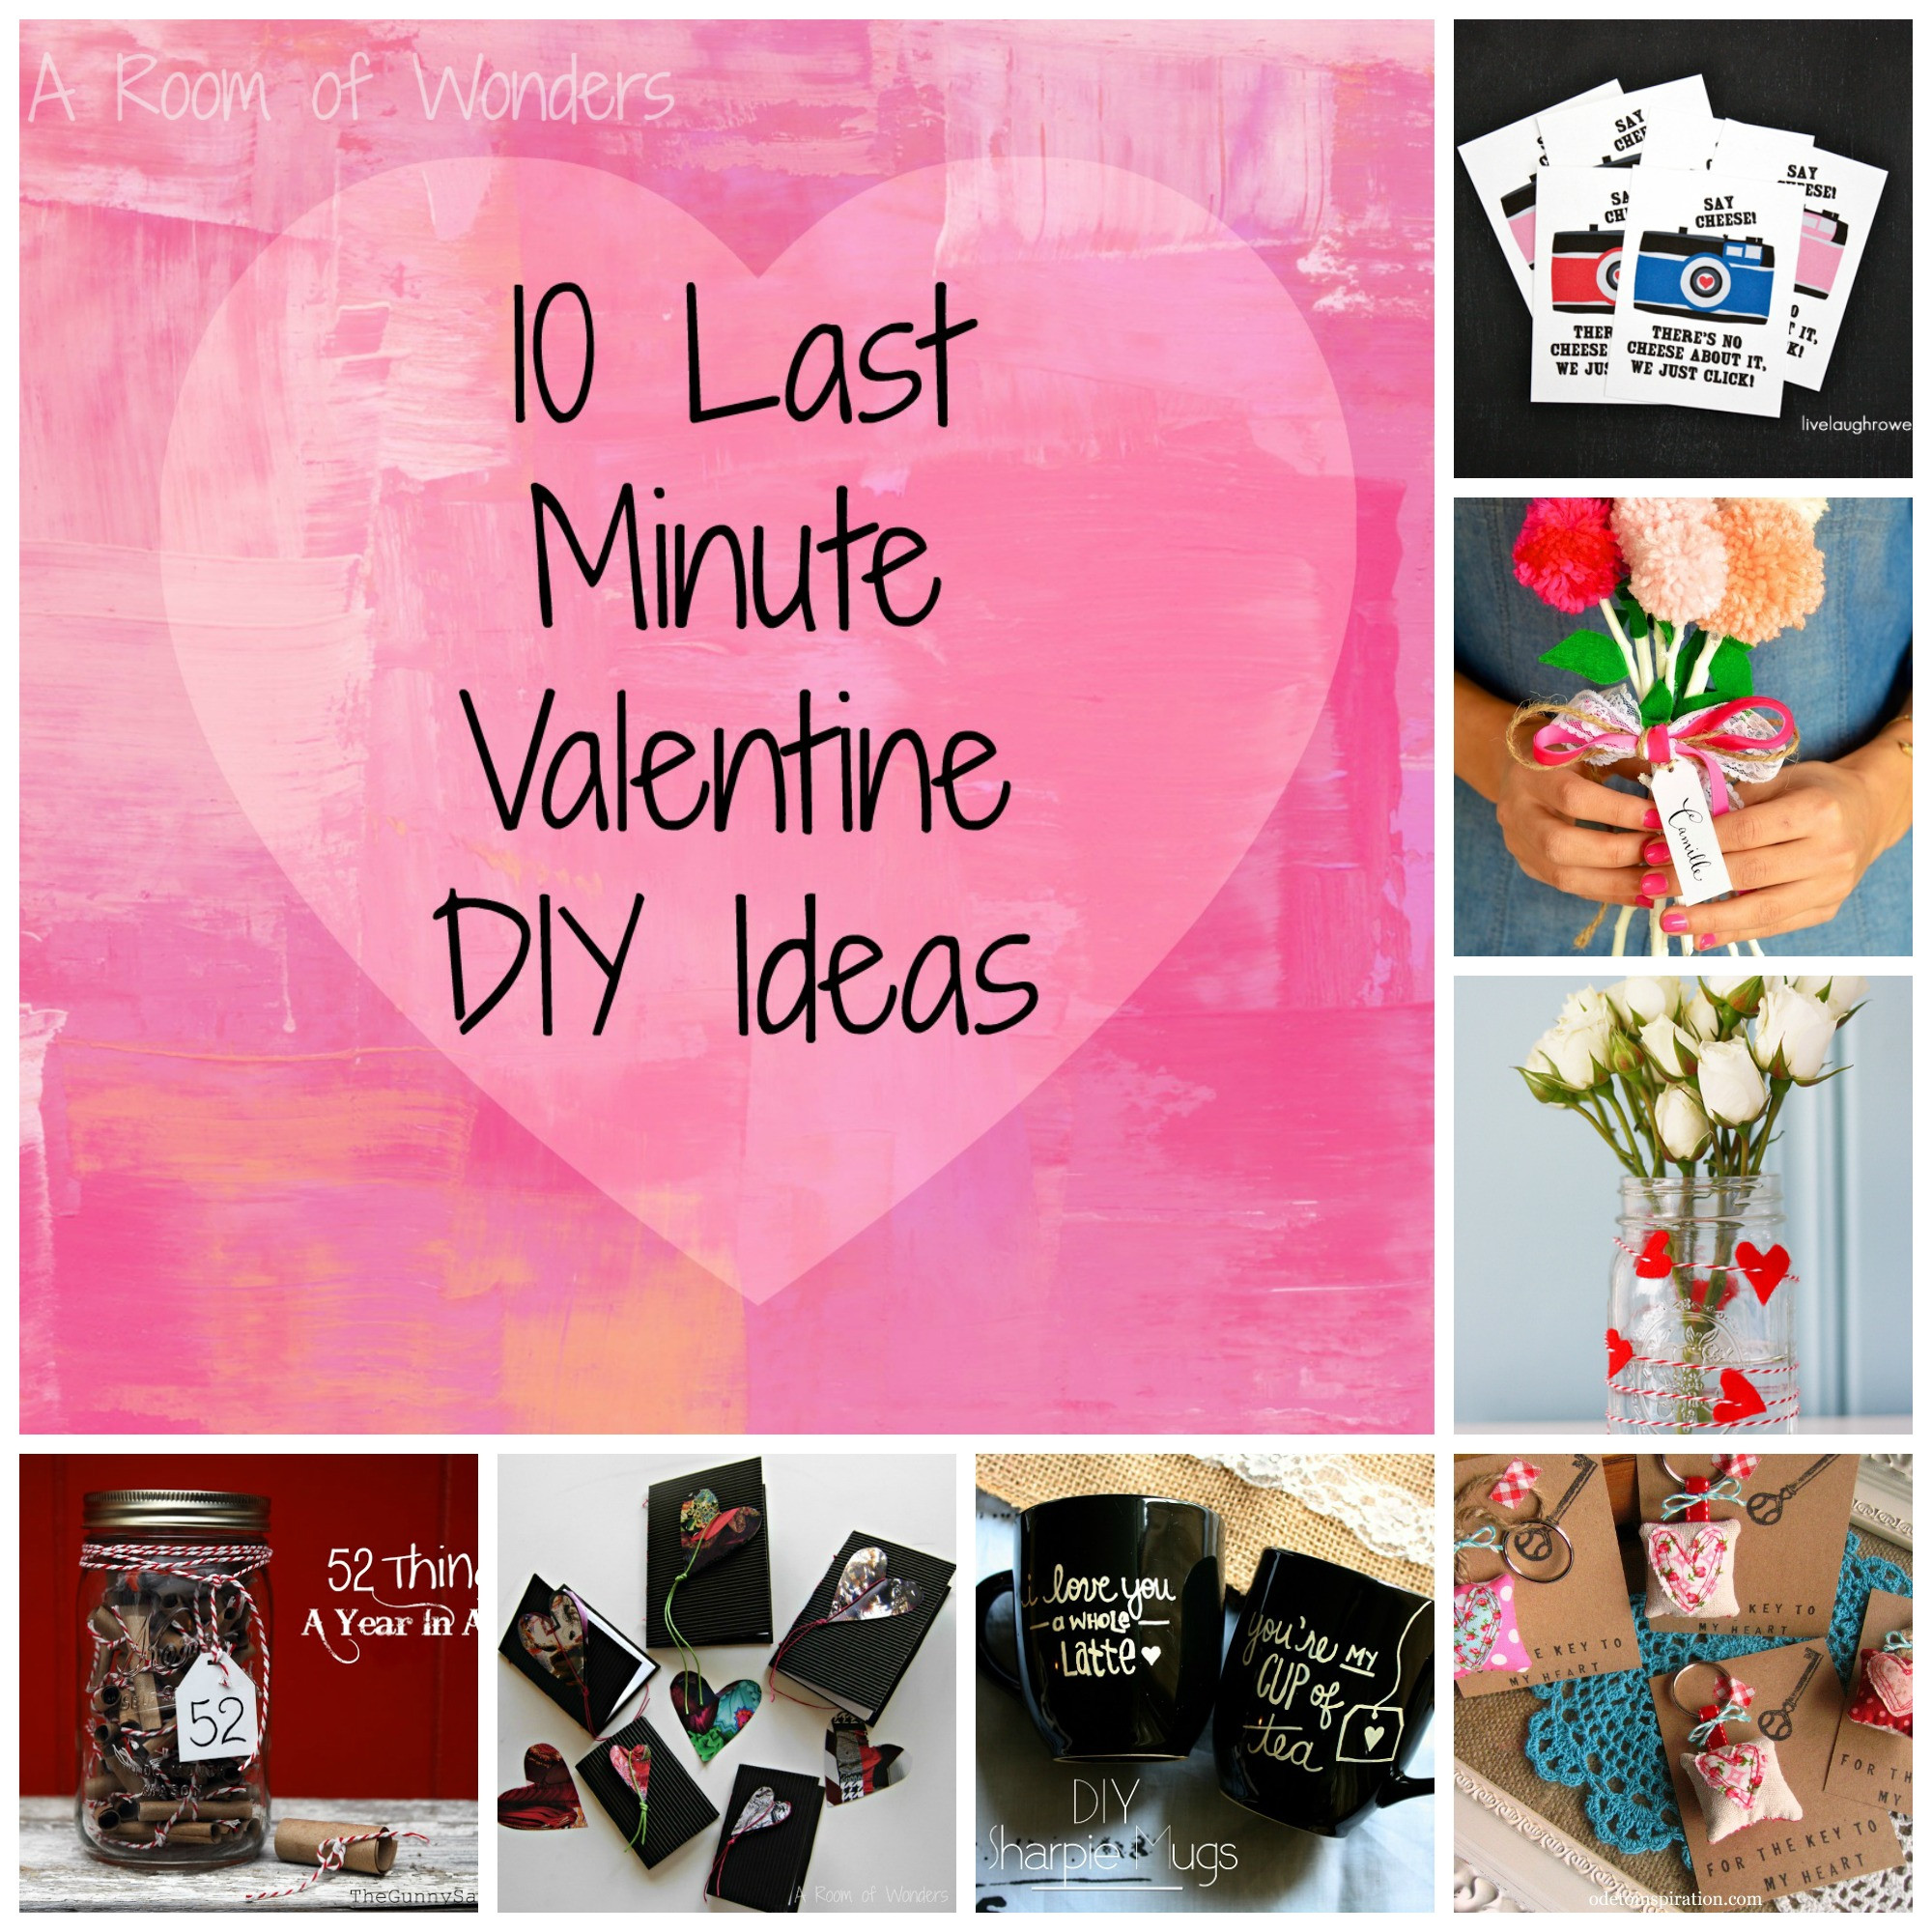 Last Minute Valentines Gift Ideas
 Projects I like 10 Last Minute Valentine DIY Ideas – A